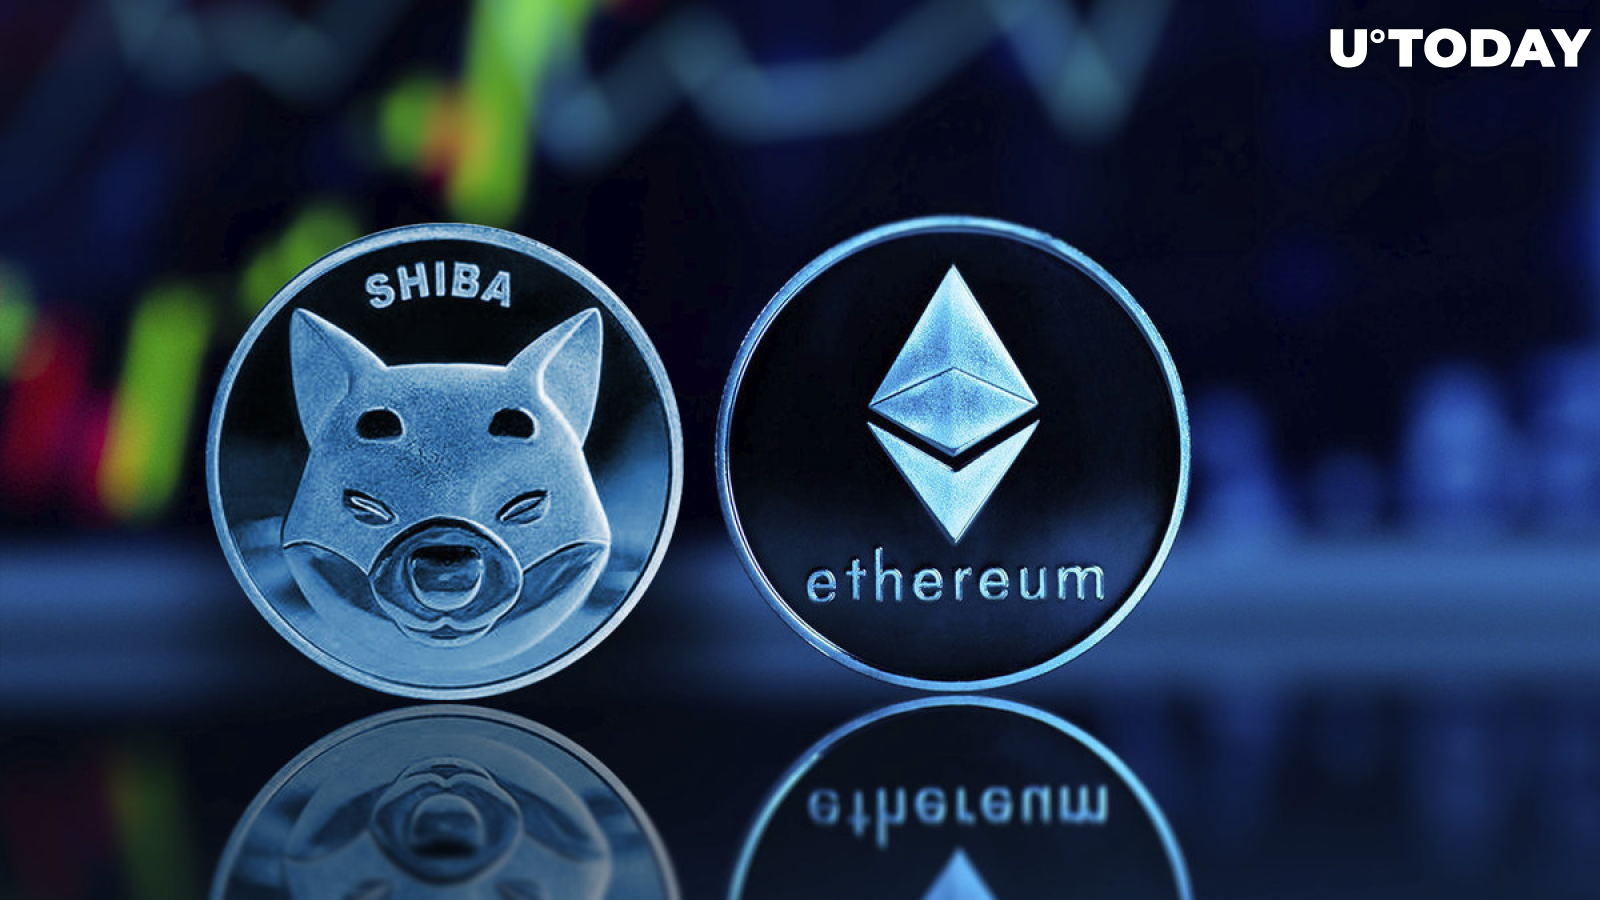 Shiba Inu (SHIB) Lead Dev's Ethereum (ETH) Domain Name for Sale, Here's for How Much